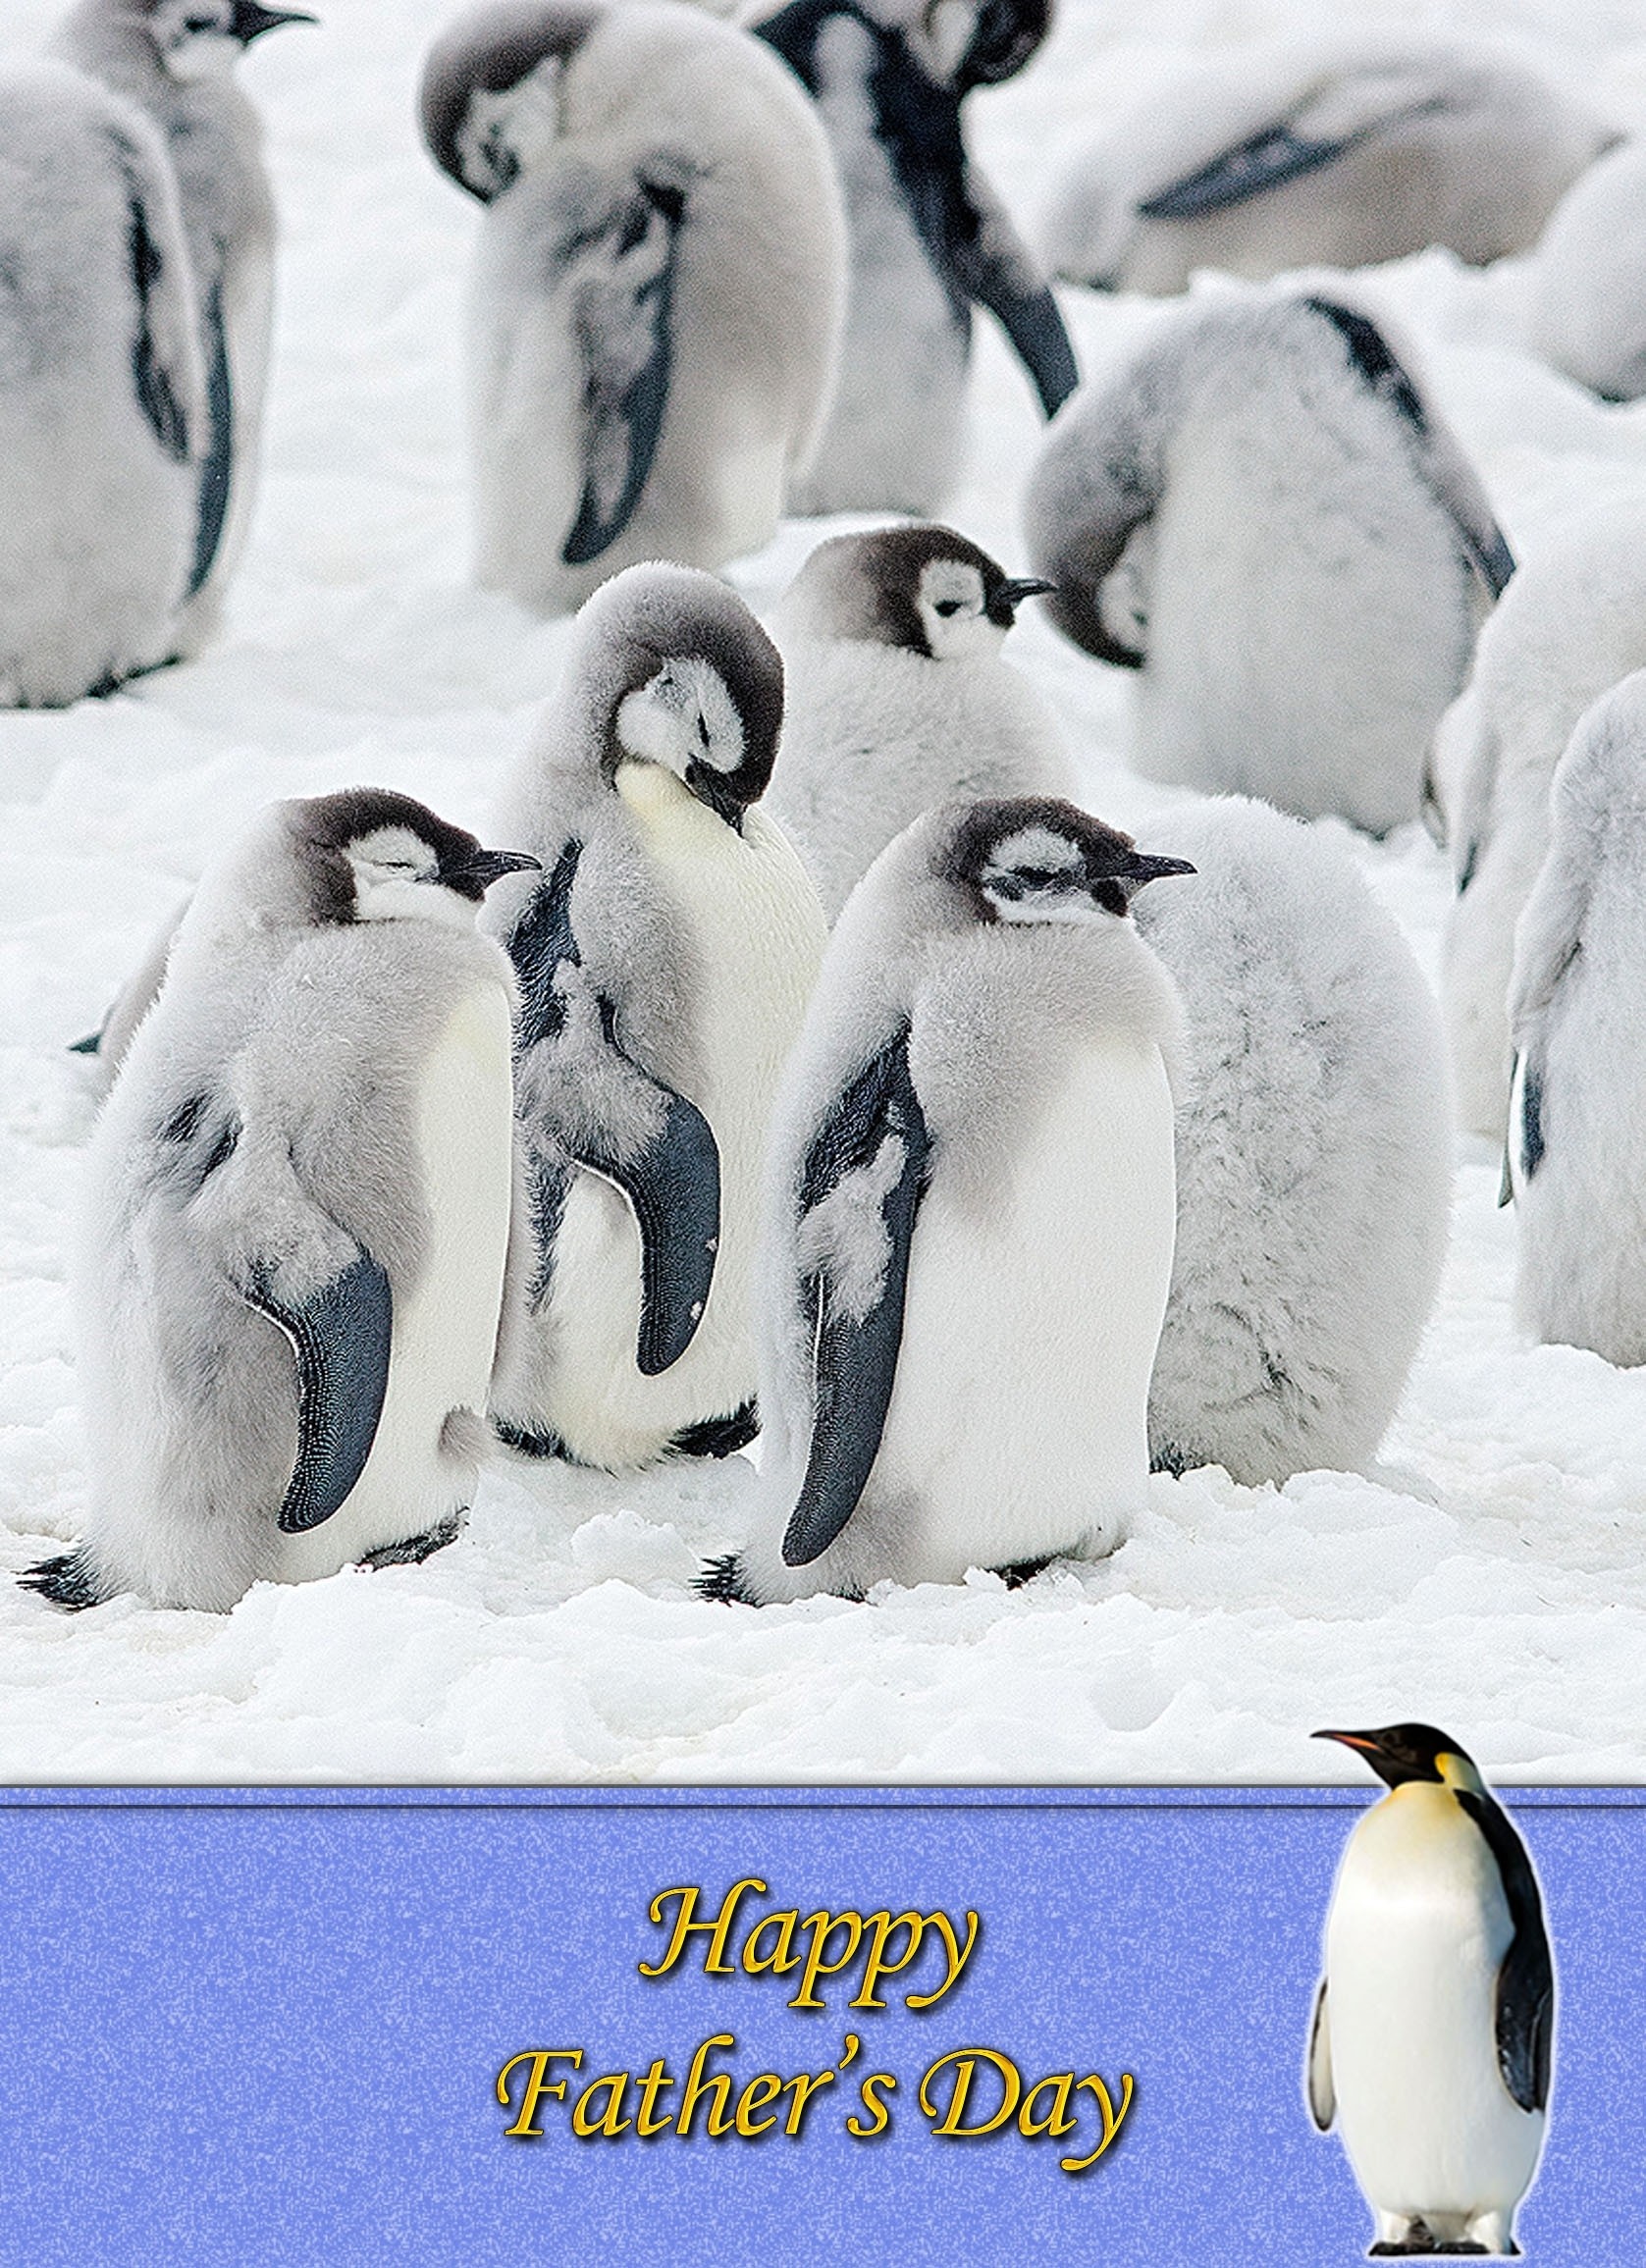 Penguin Father's Day Card